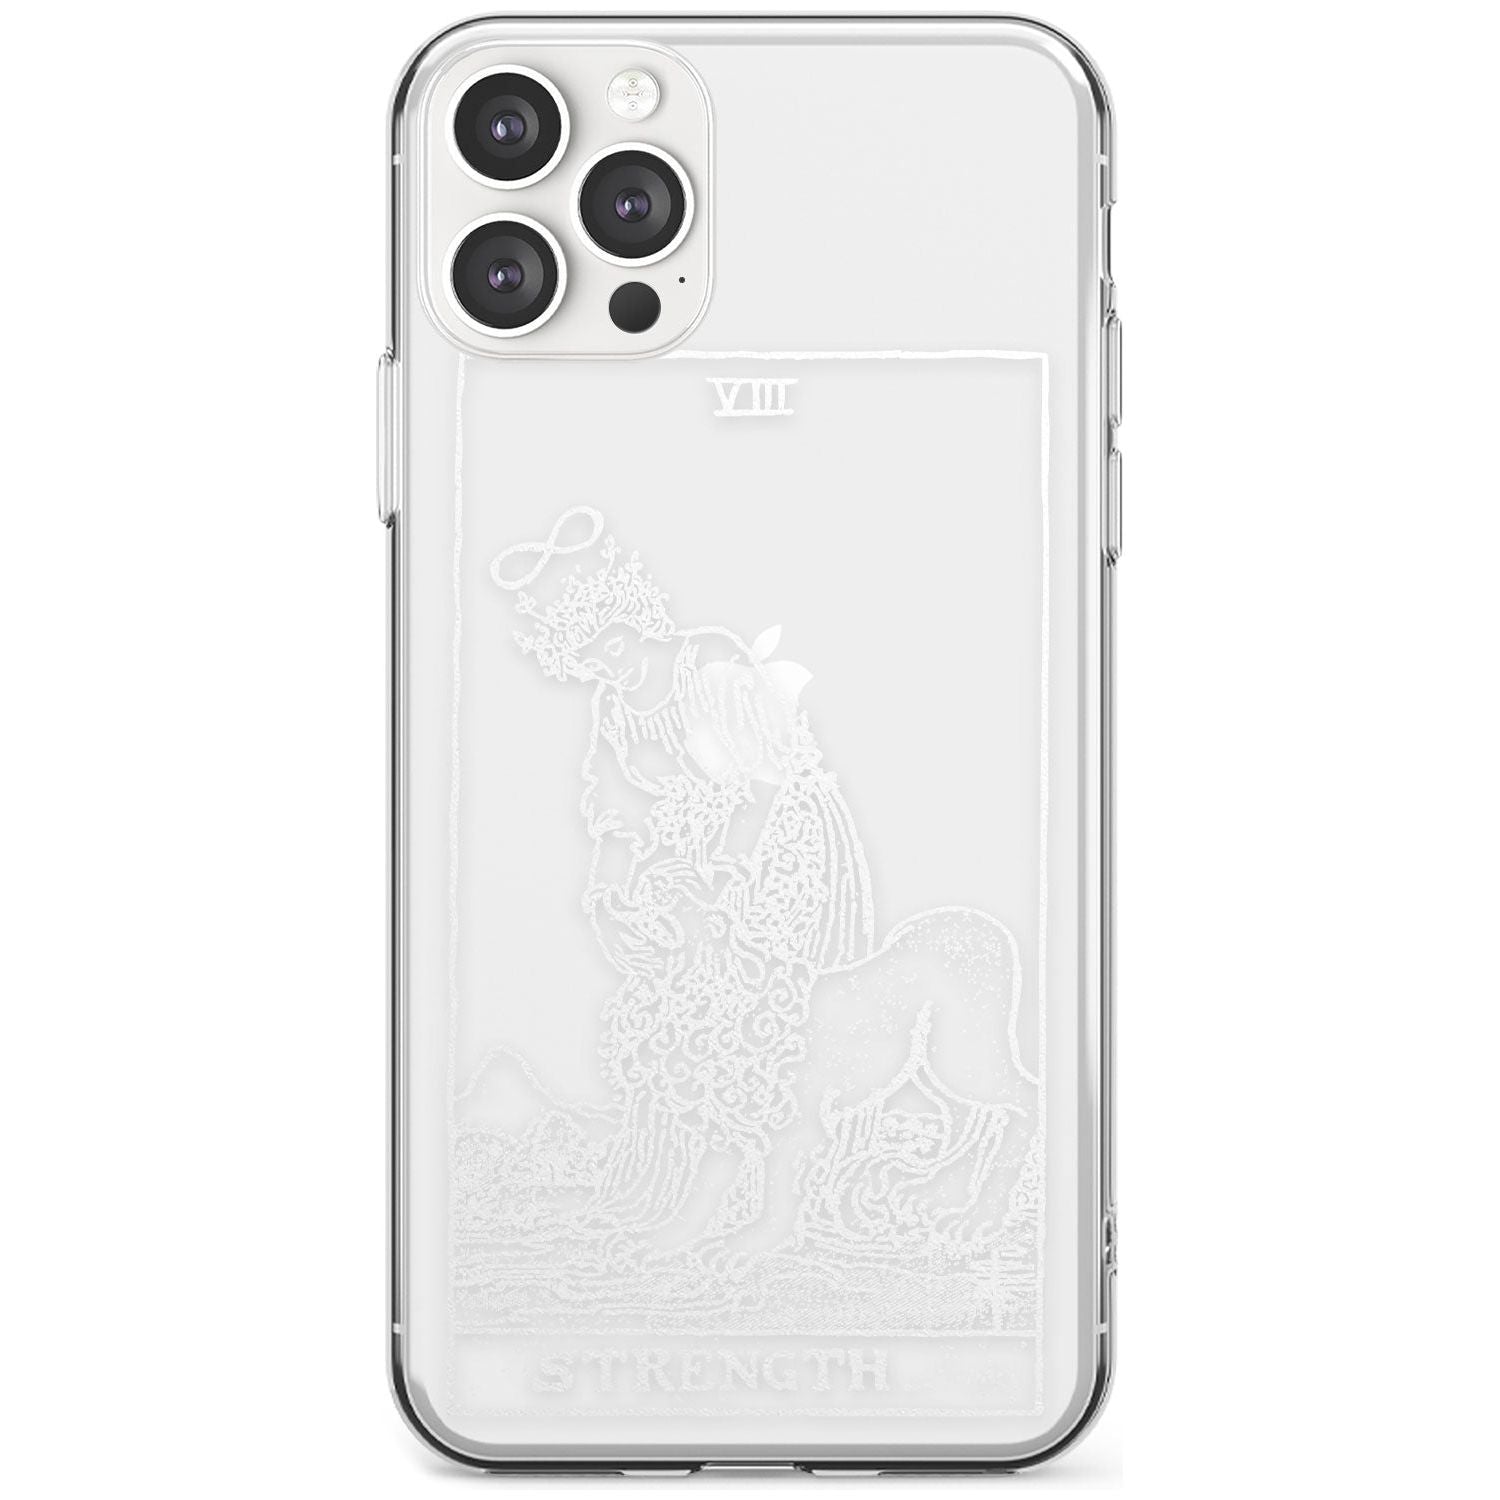 Strength Tarot Card - White Transparent Black Impact Phone Case for iPhone 11 Pro Max